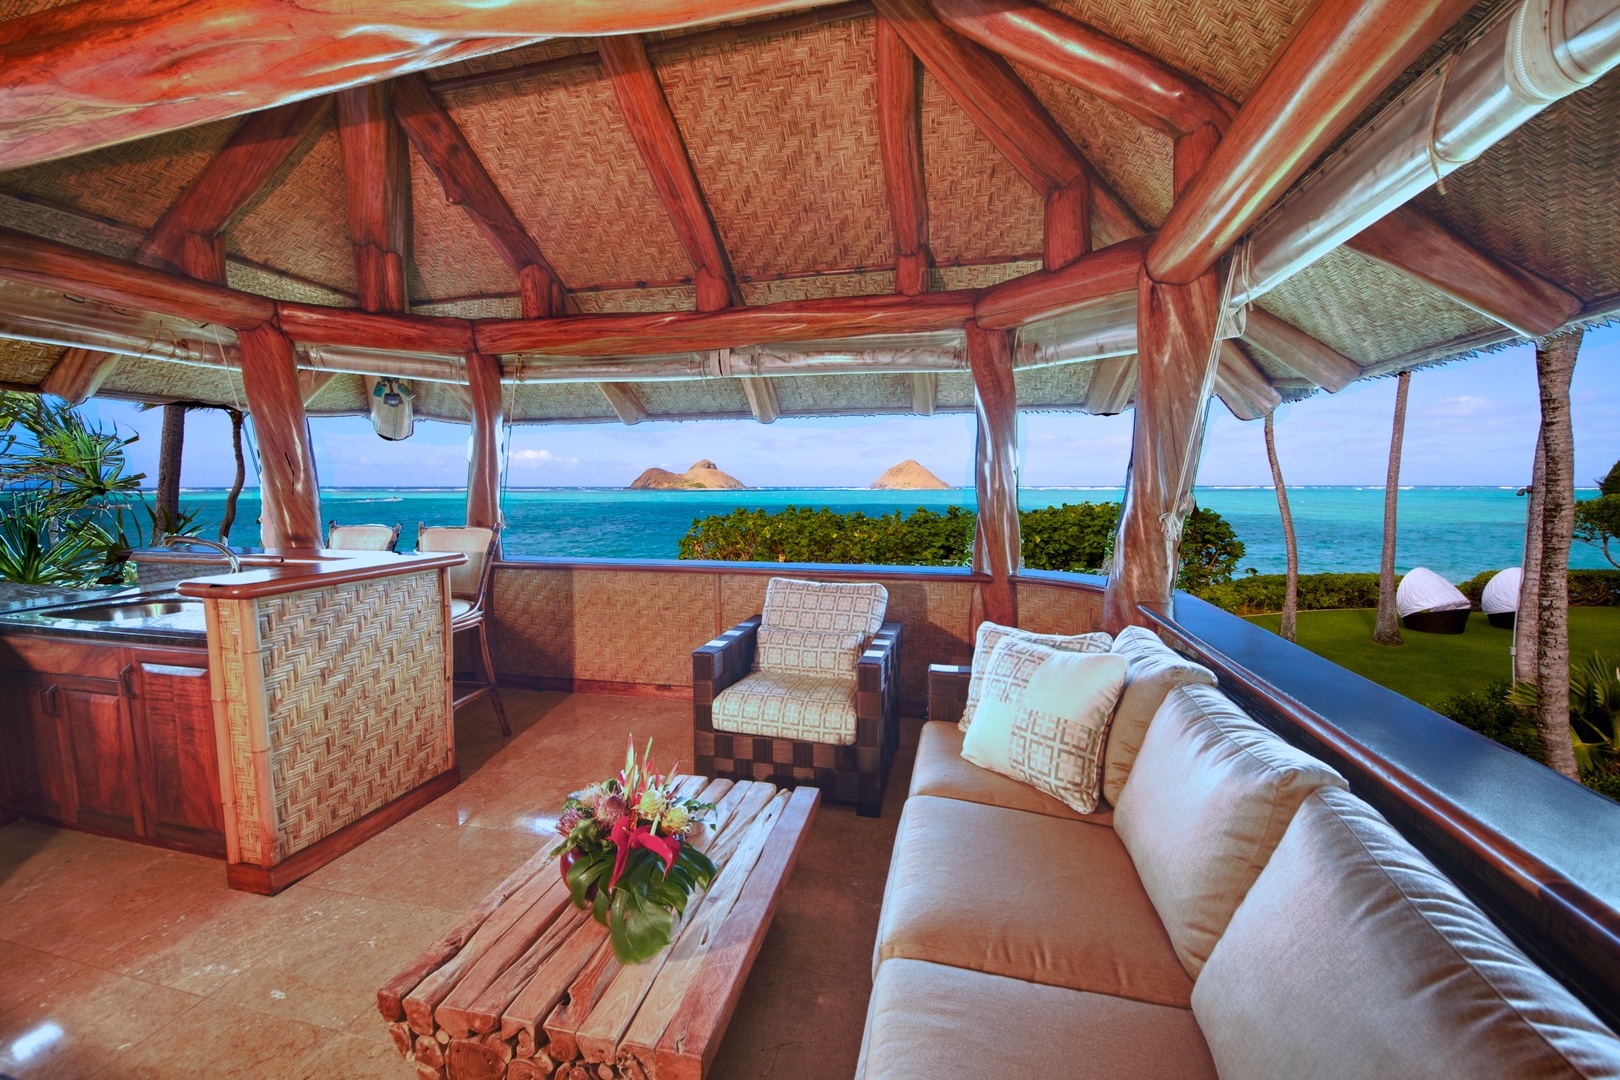 Kailua Vacation Rentals, Paul Mitchell Estate* - Open-air Lounge (or "Crow's Nest") on upper level of Boat House